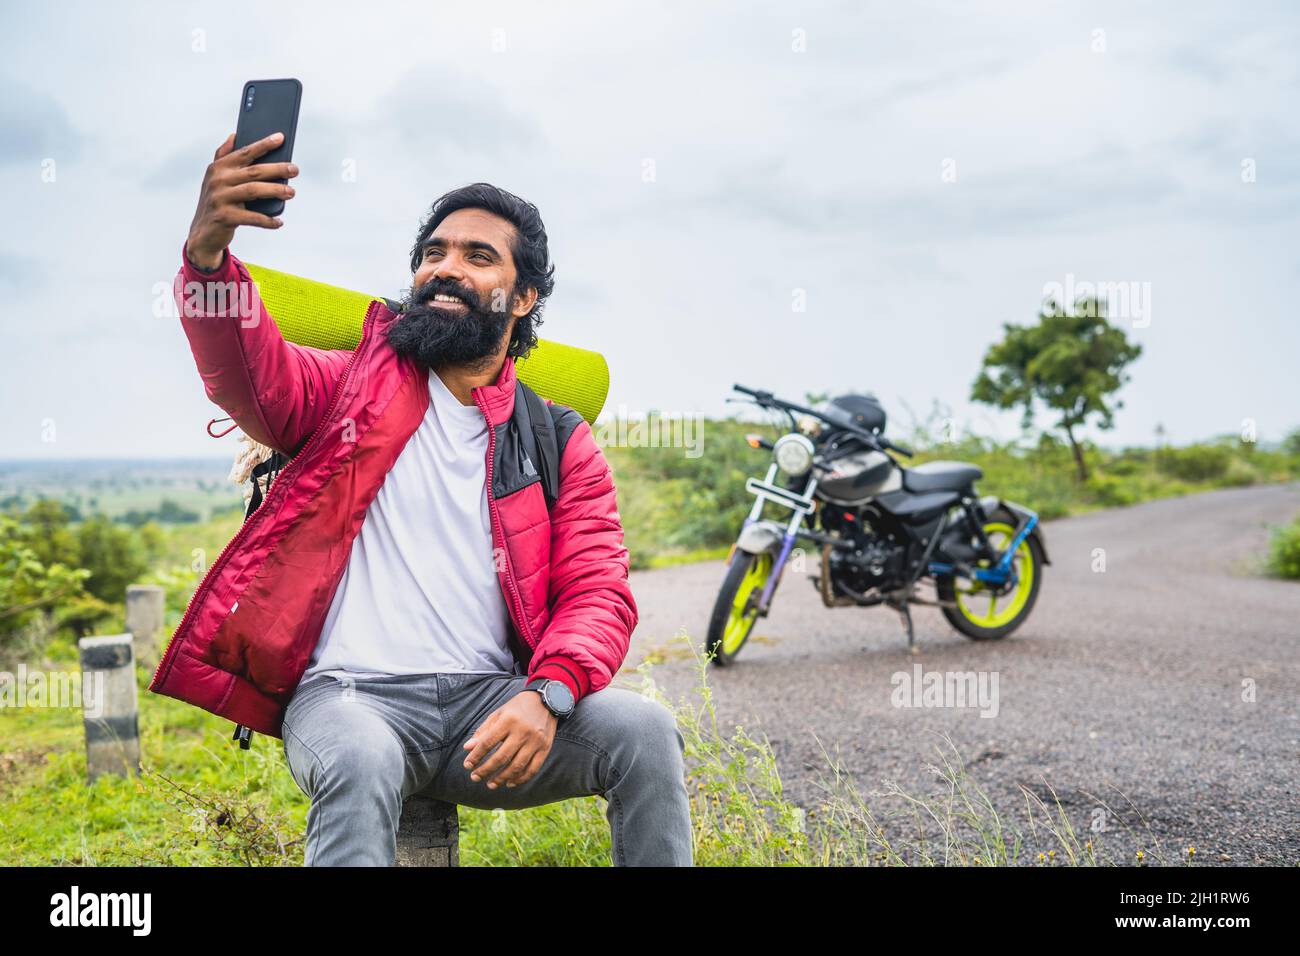 Happy smiling beard man making video call on mobile phone in front of motorbike while sitting on roadside - concept of technology, social media Stock Photo